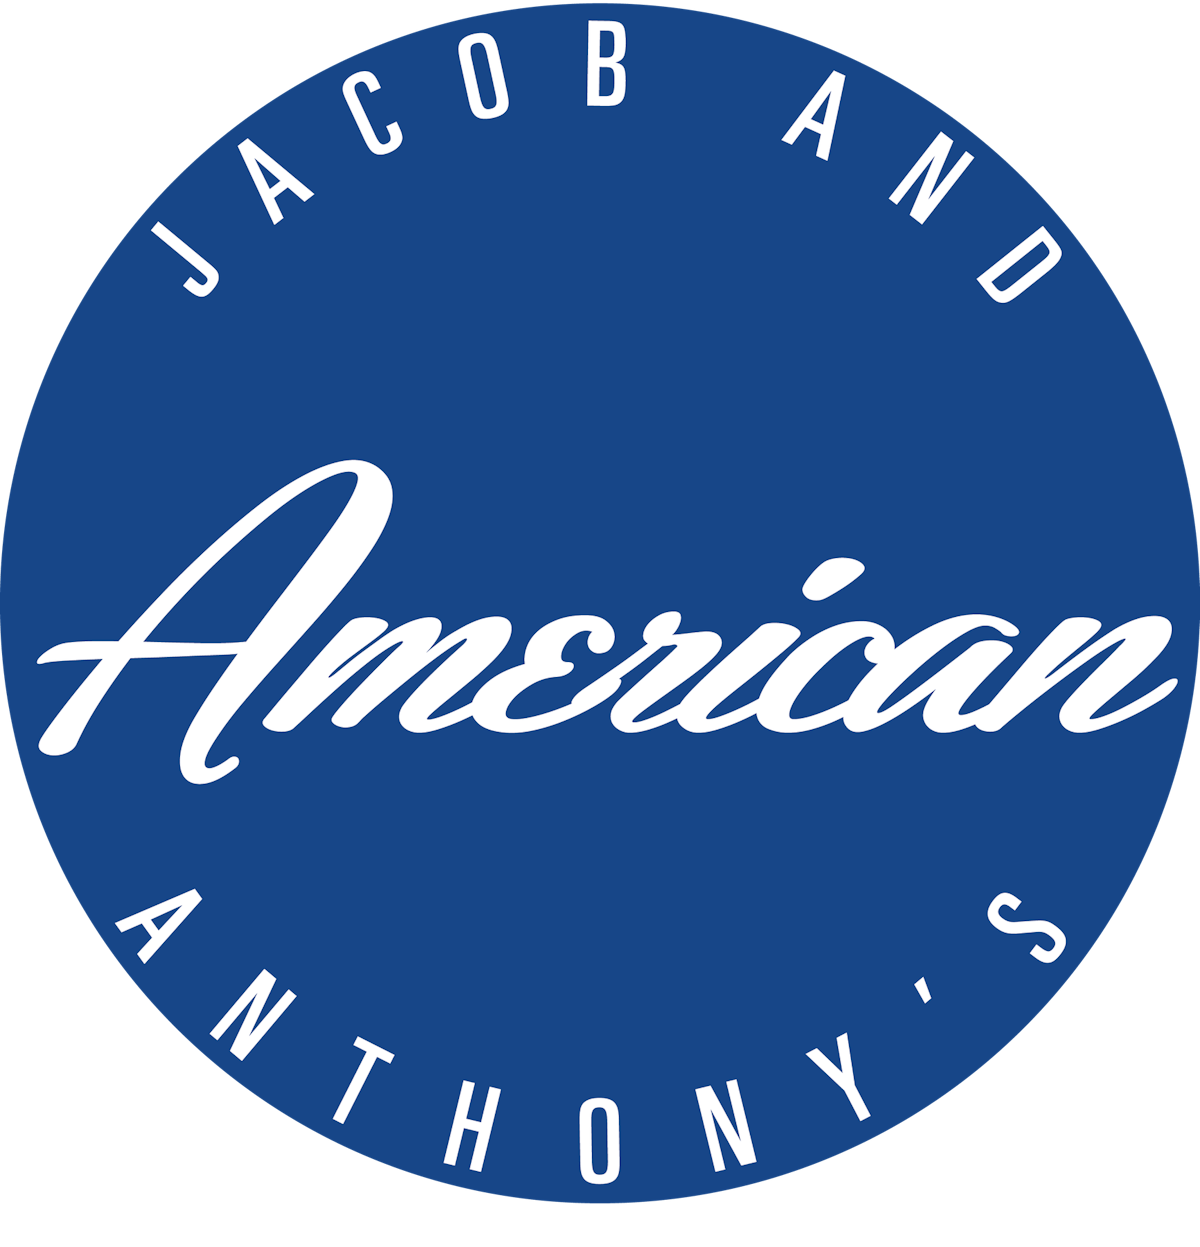 Jacob and Anthony's American logo